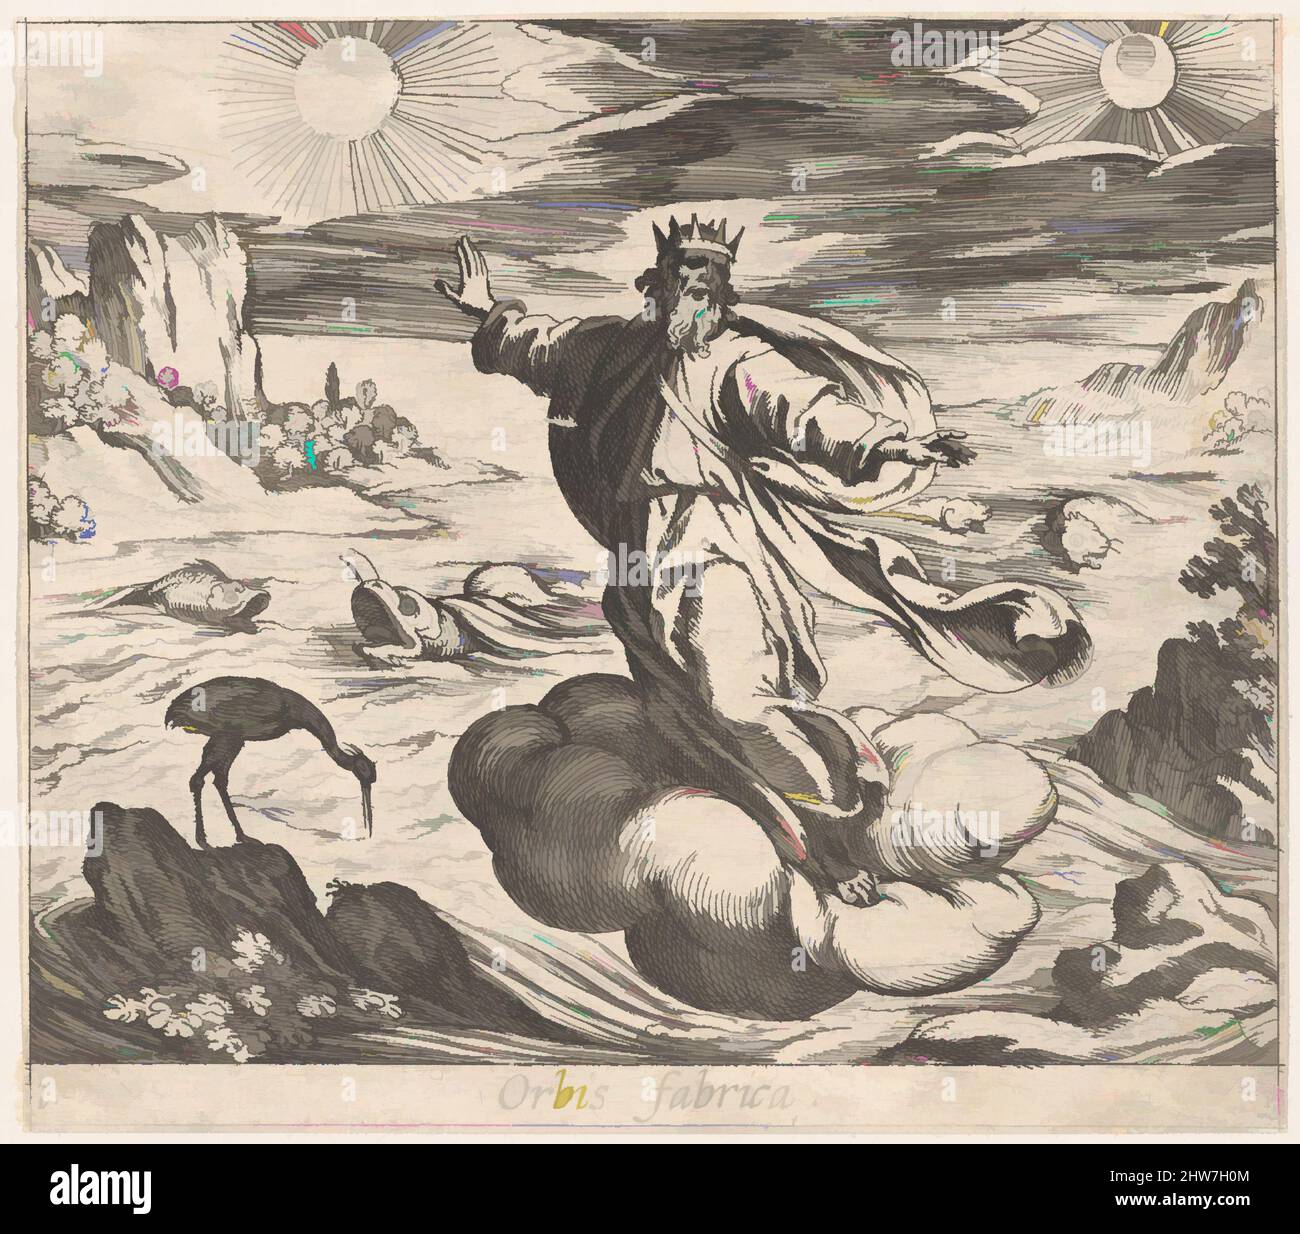 Art inspired by Plate 1: The Creation of the World (Orbis fabrica), from Ovid's 'Metamorphoses', 1606, Etching, Sheet: 4 1/8 × 4 9/16 in. (10.4 × 11.6 cm), Prints, Antonio Tempesta (Italian, Florence 1555–1630 Rome, Classic works modernized by Artotop with a splash of modernity. Shapes, color and value, eye-catching visual impact on art. Emotions through freedom of artworks in a contemporary way. A timeless message pursuing a wildly creative new direction. Artists turning to the digital medium and creating the Artotop NFT Stock Photo